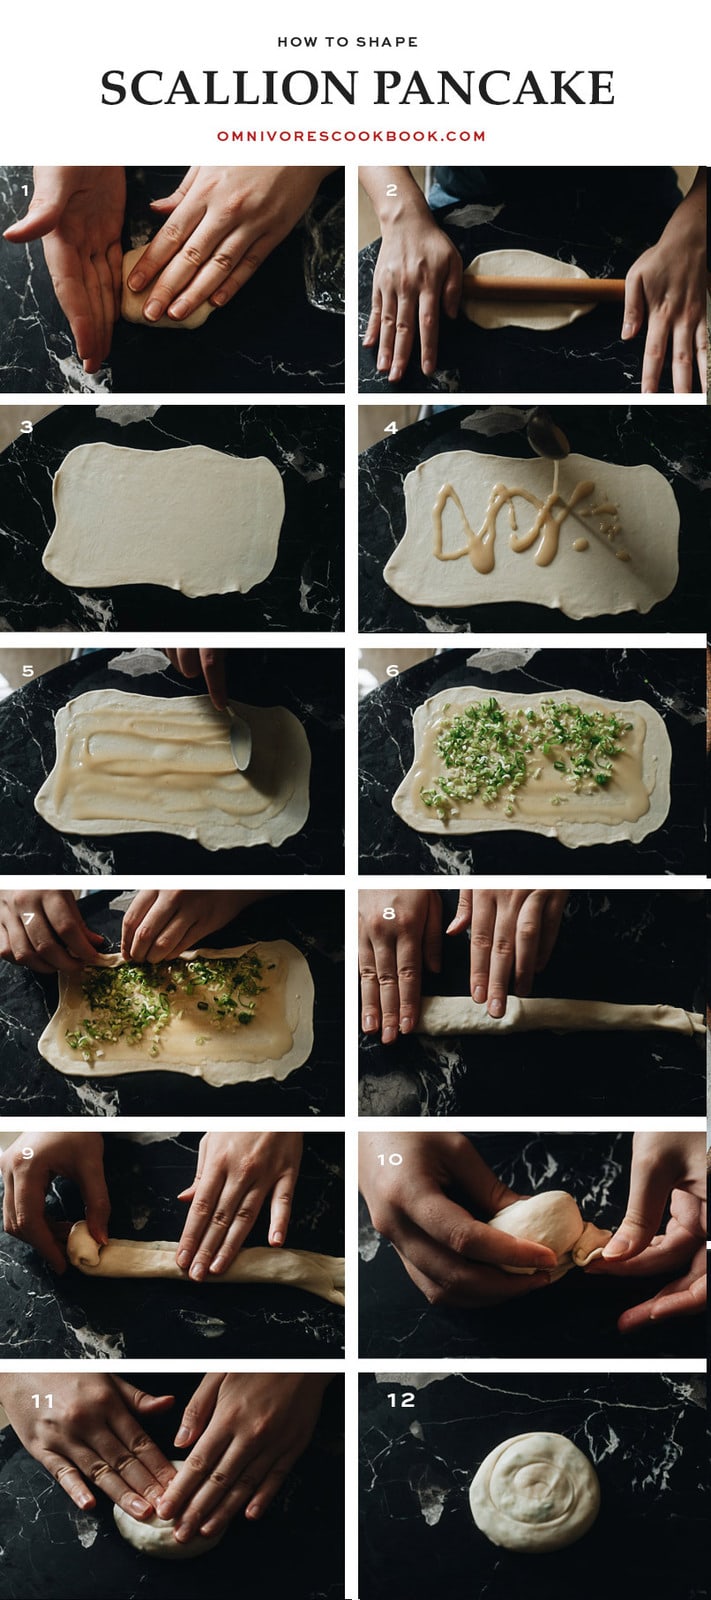 How to form scallion pancake step-by-step